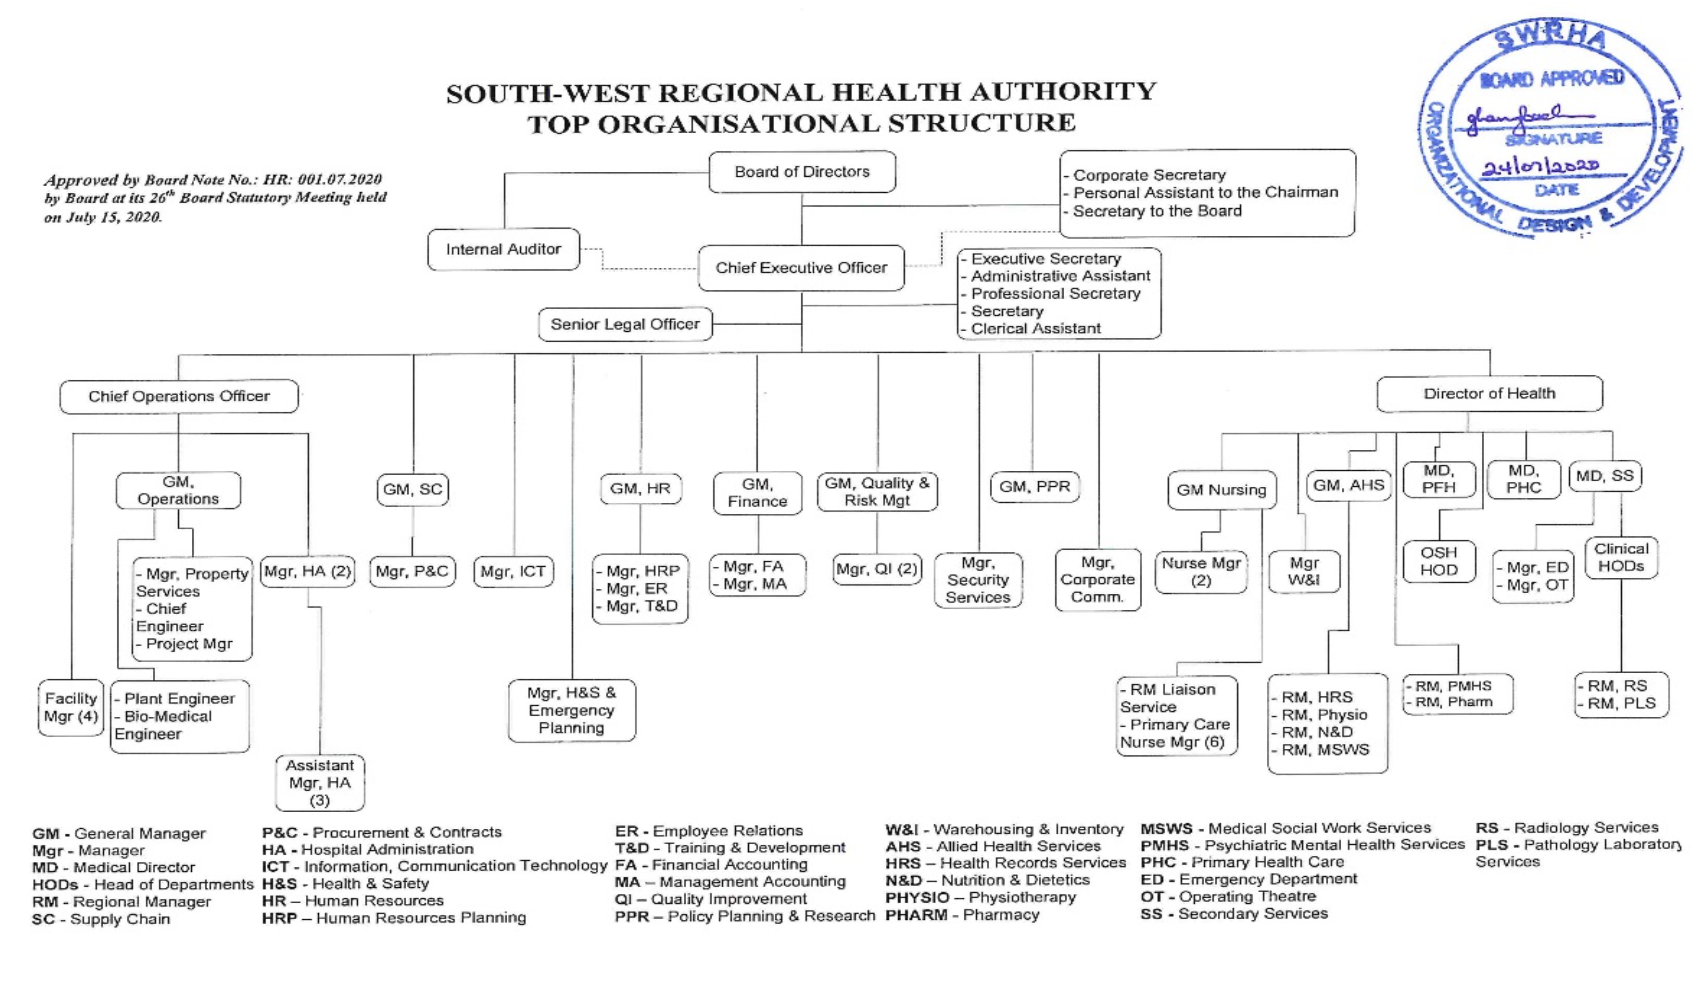 SWRHA Top Organisational Structure